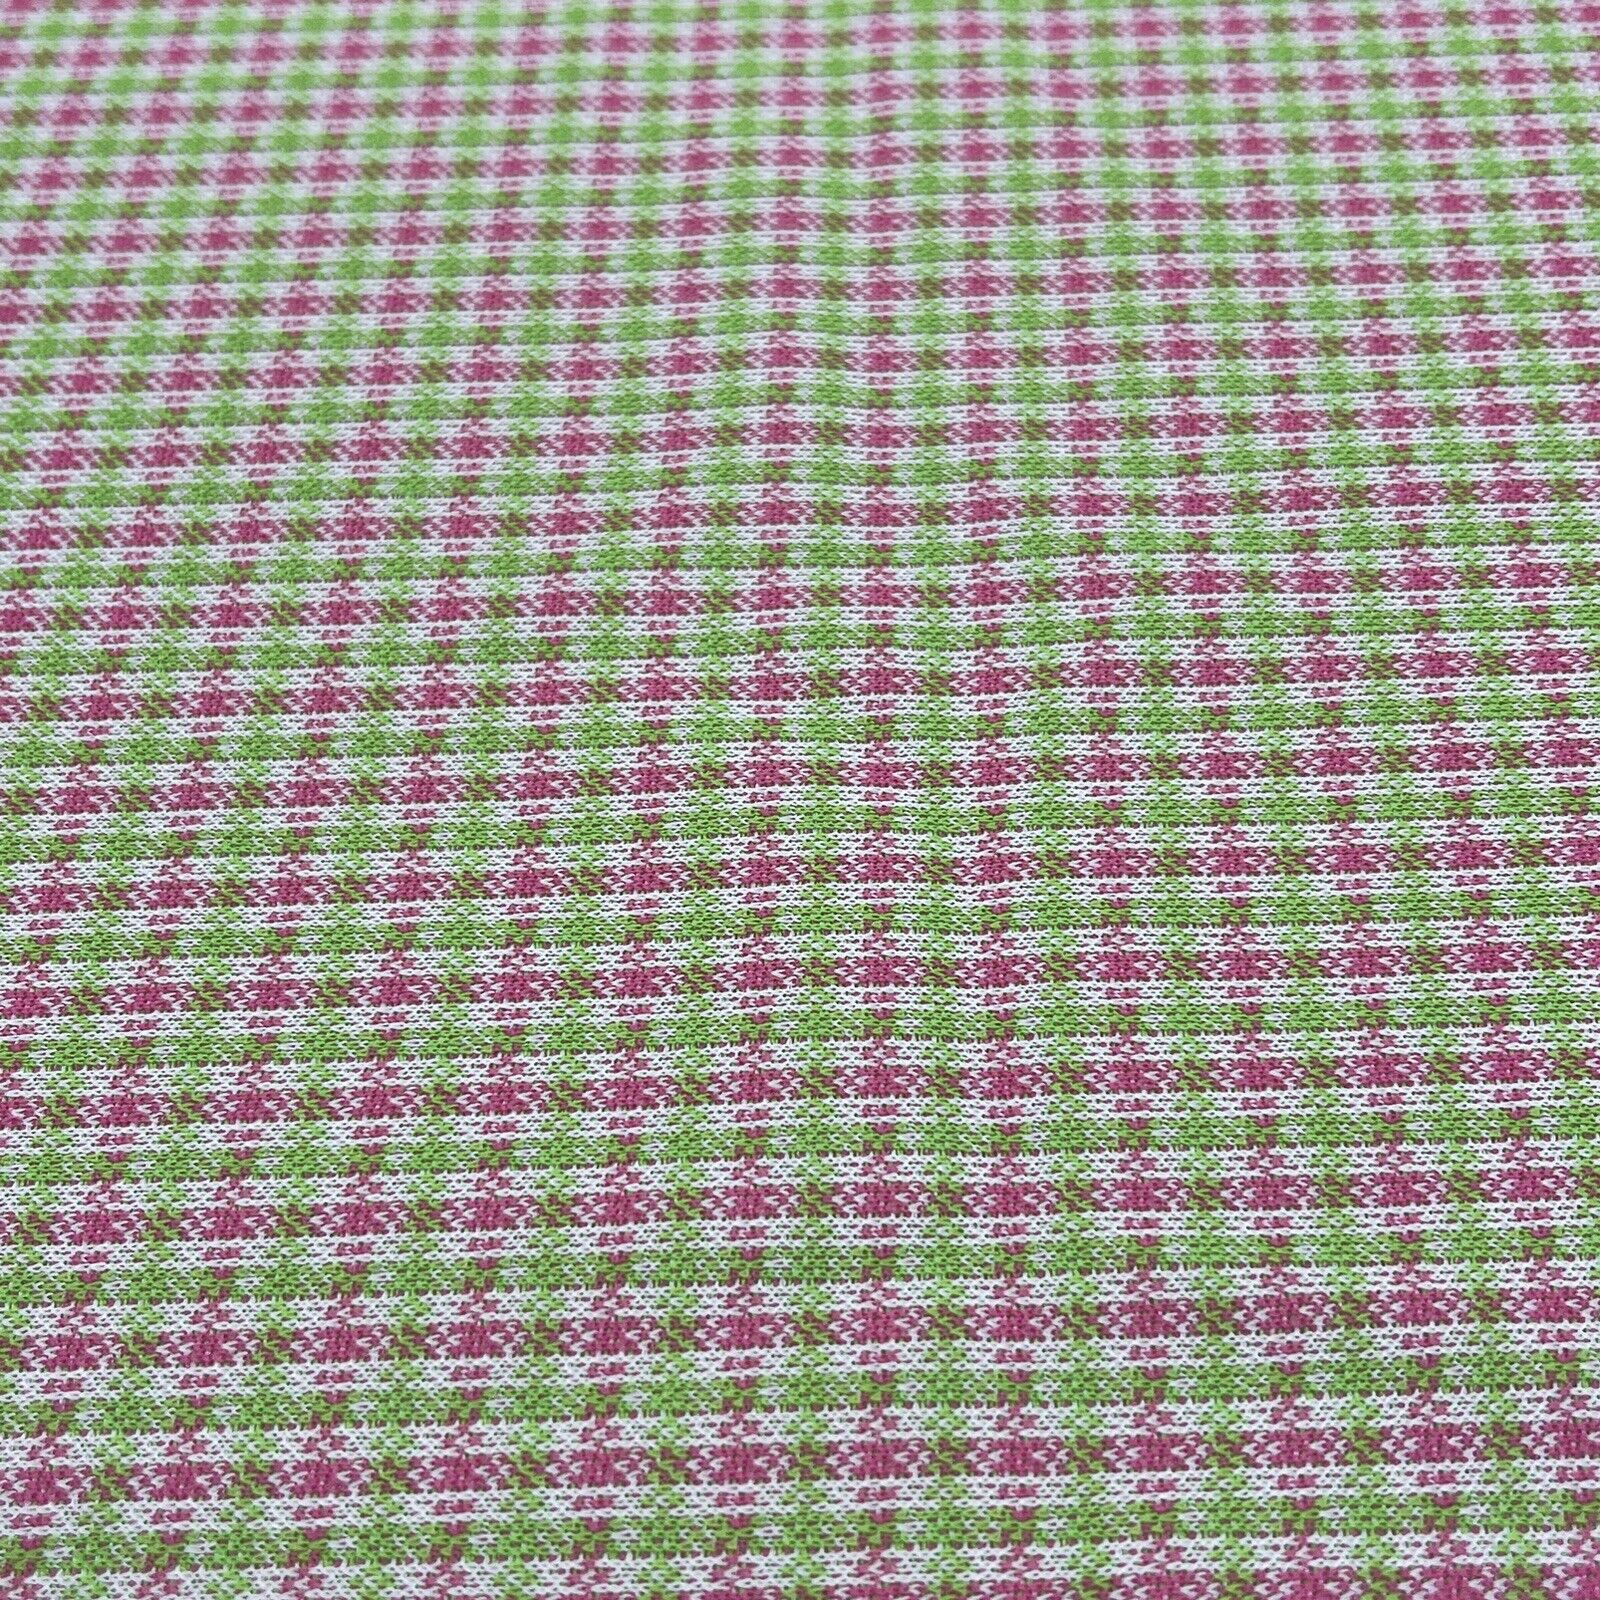 Vtg 70s Polyester Knit Fabric Pink Green Plaid 2.4 Yards x 60\